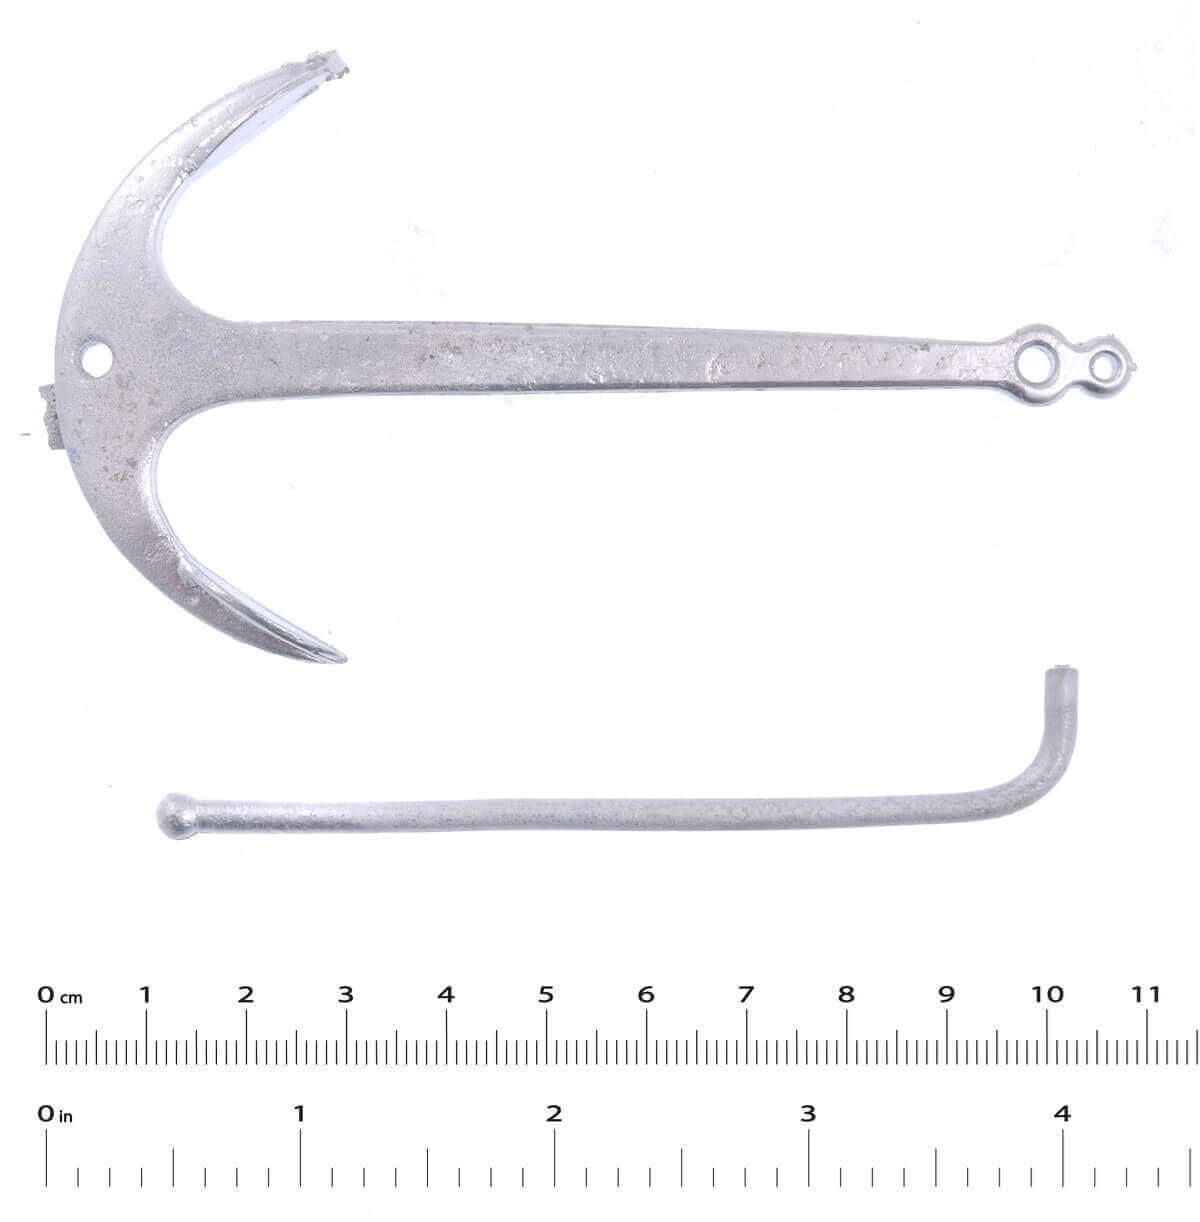 White Metal Boat Fittings Barge Anchor